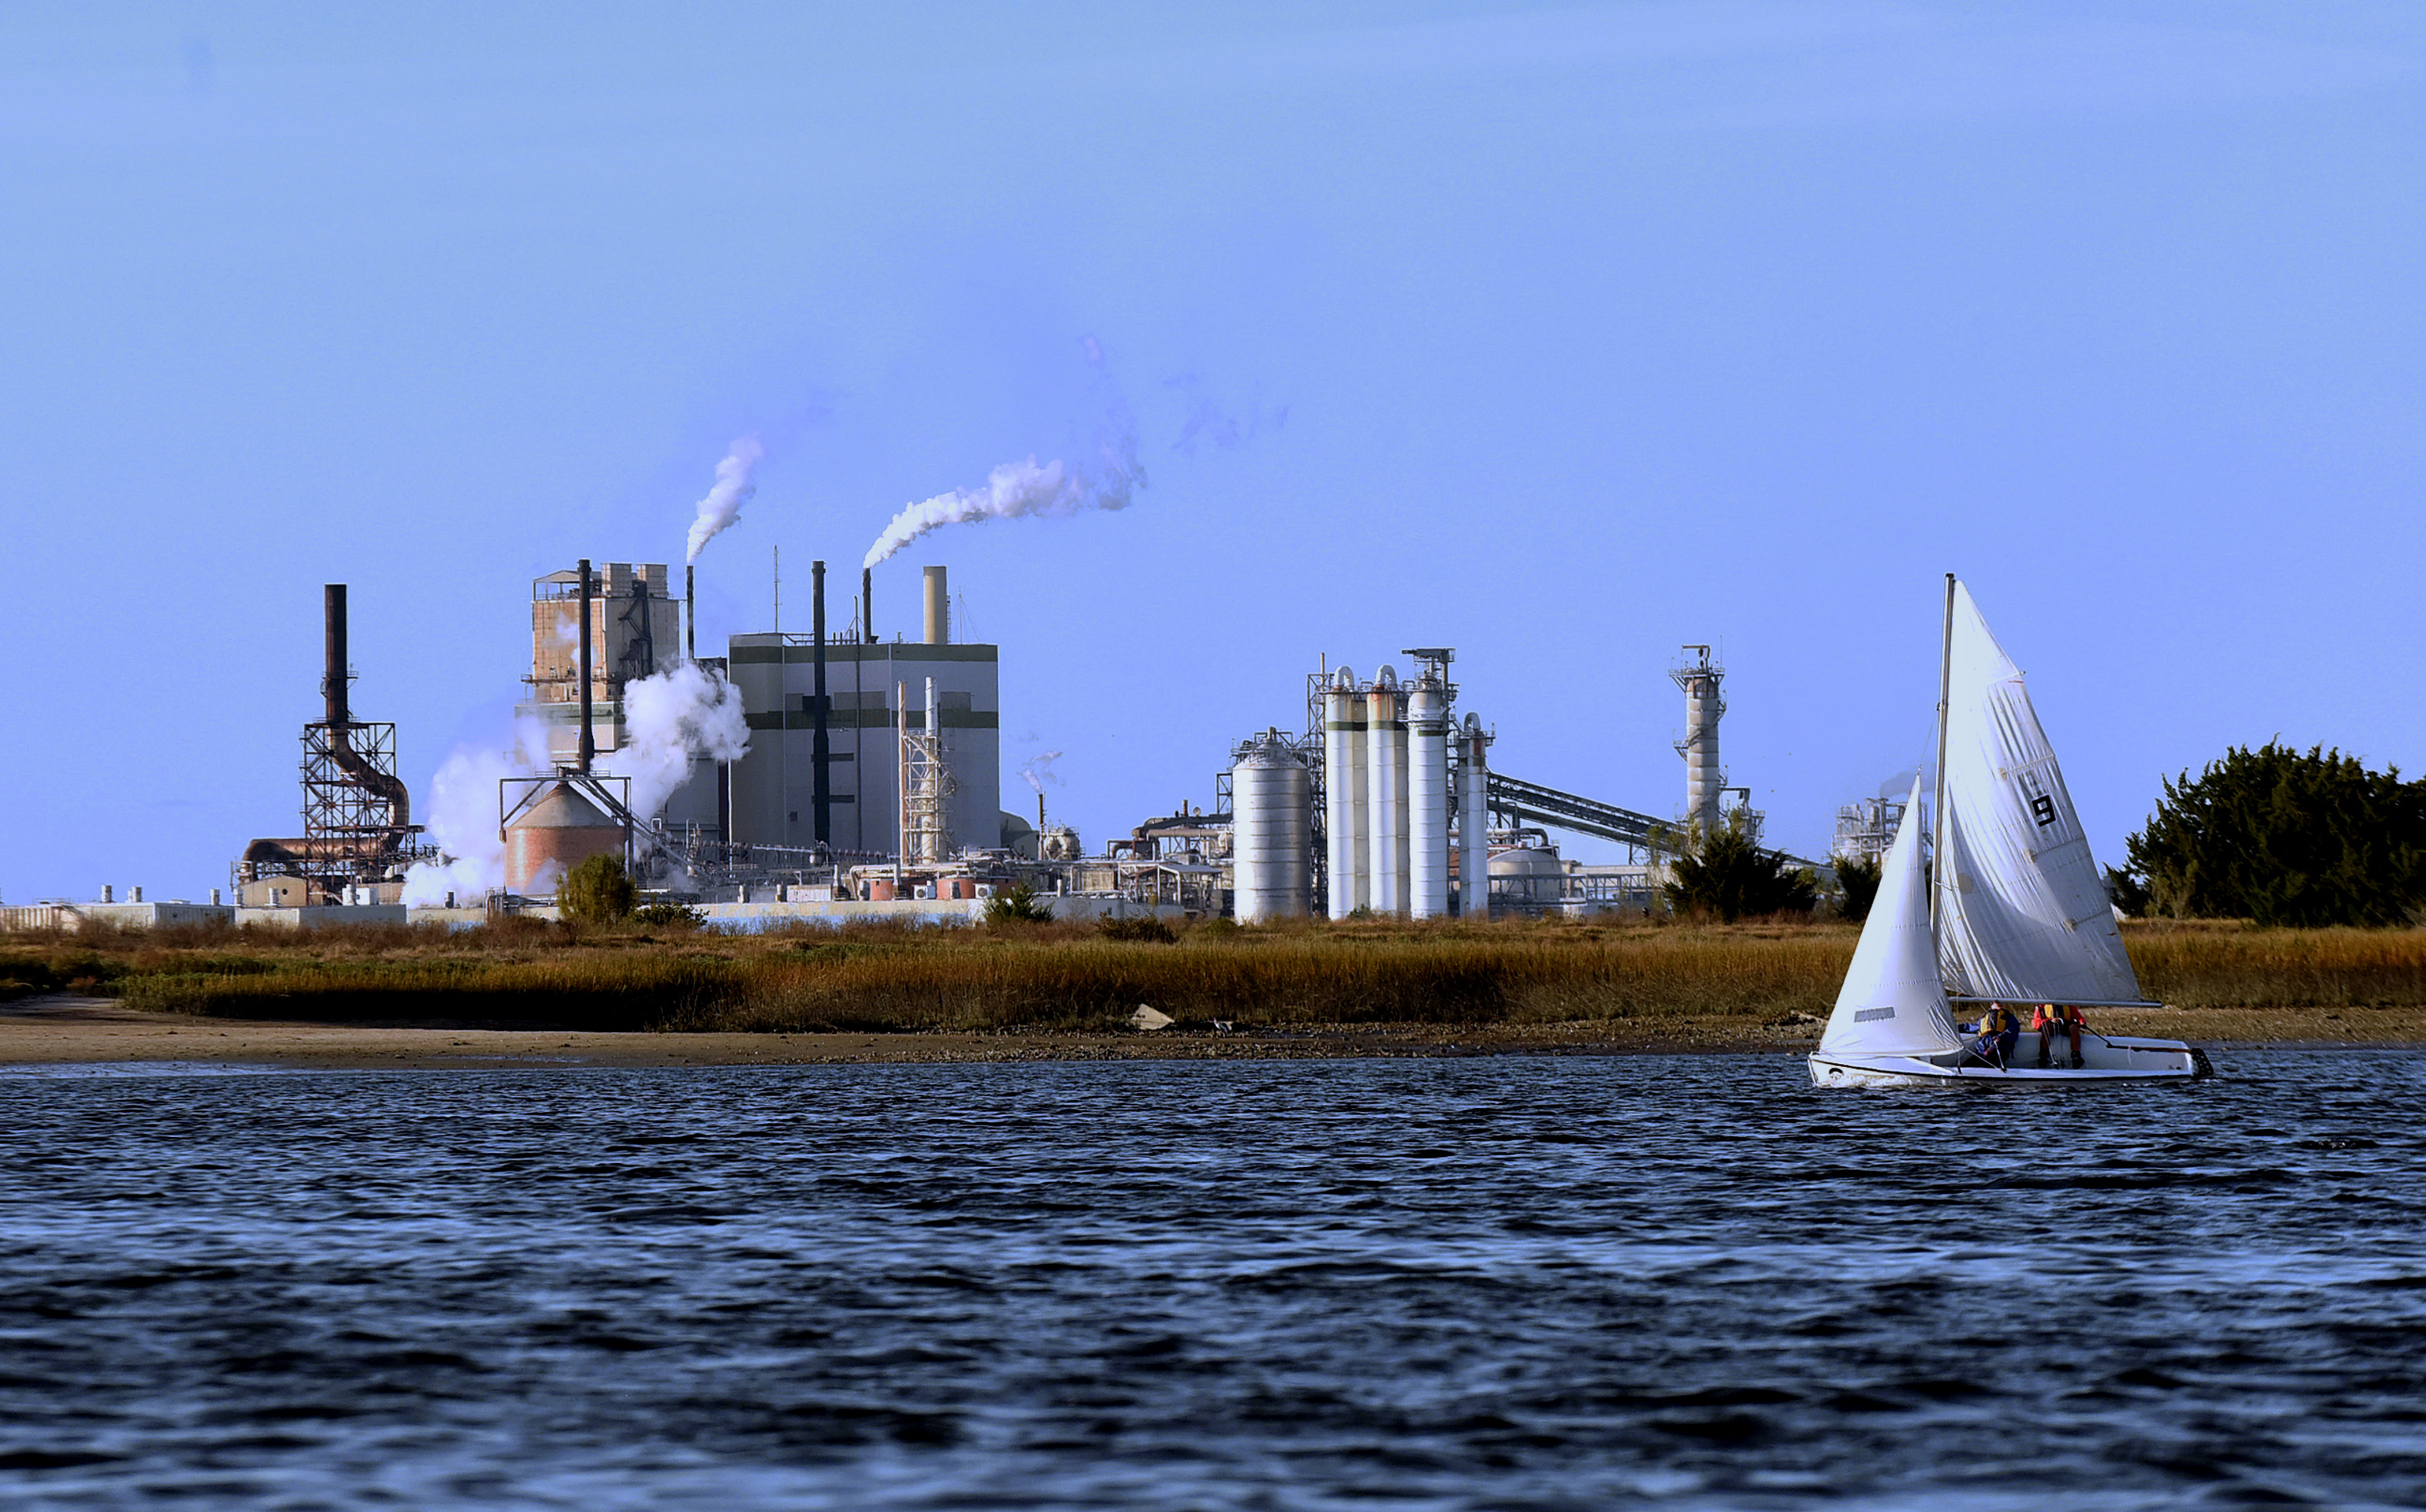 Boaters pass near the Georgia-Pacific pulp and paper mill on Dec. 14, 2020 in Brunswick, Georgia. (Paul Hennessy—NurPhoto/Getty Images)